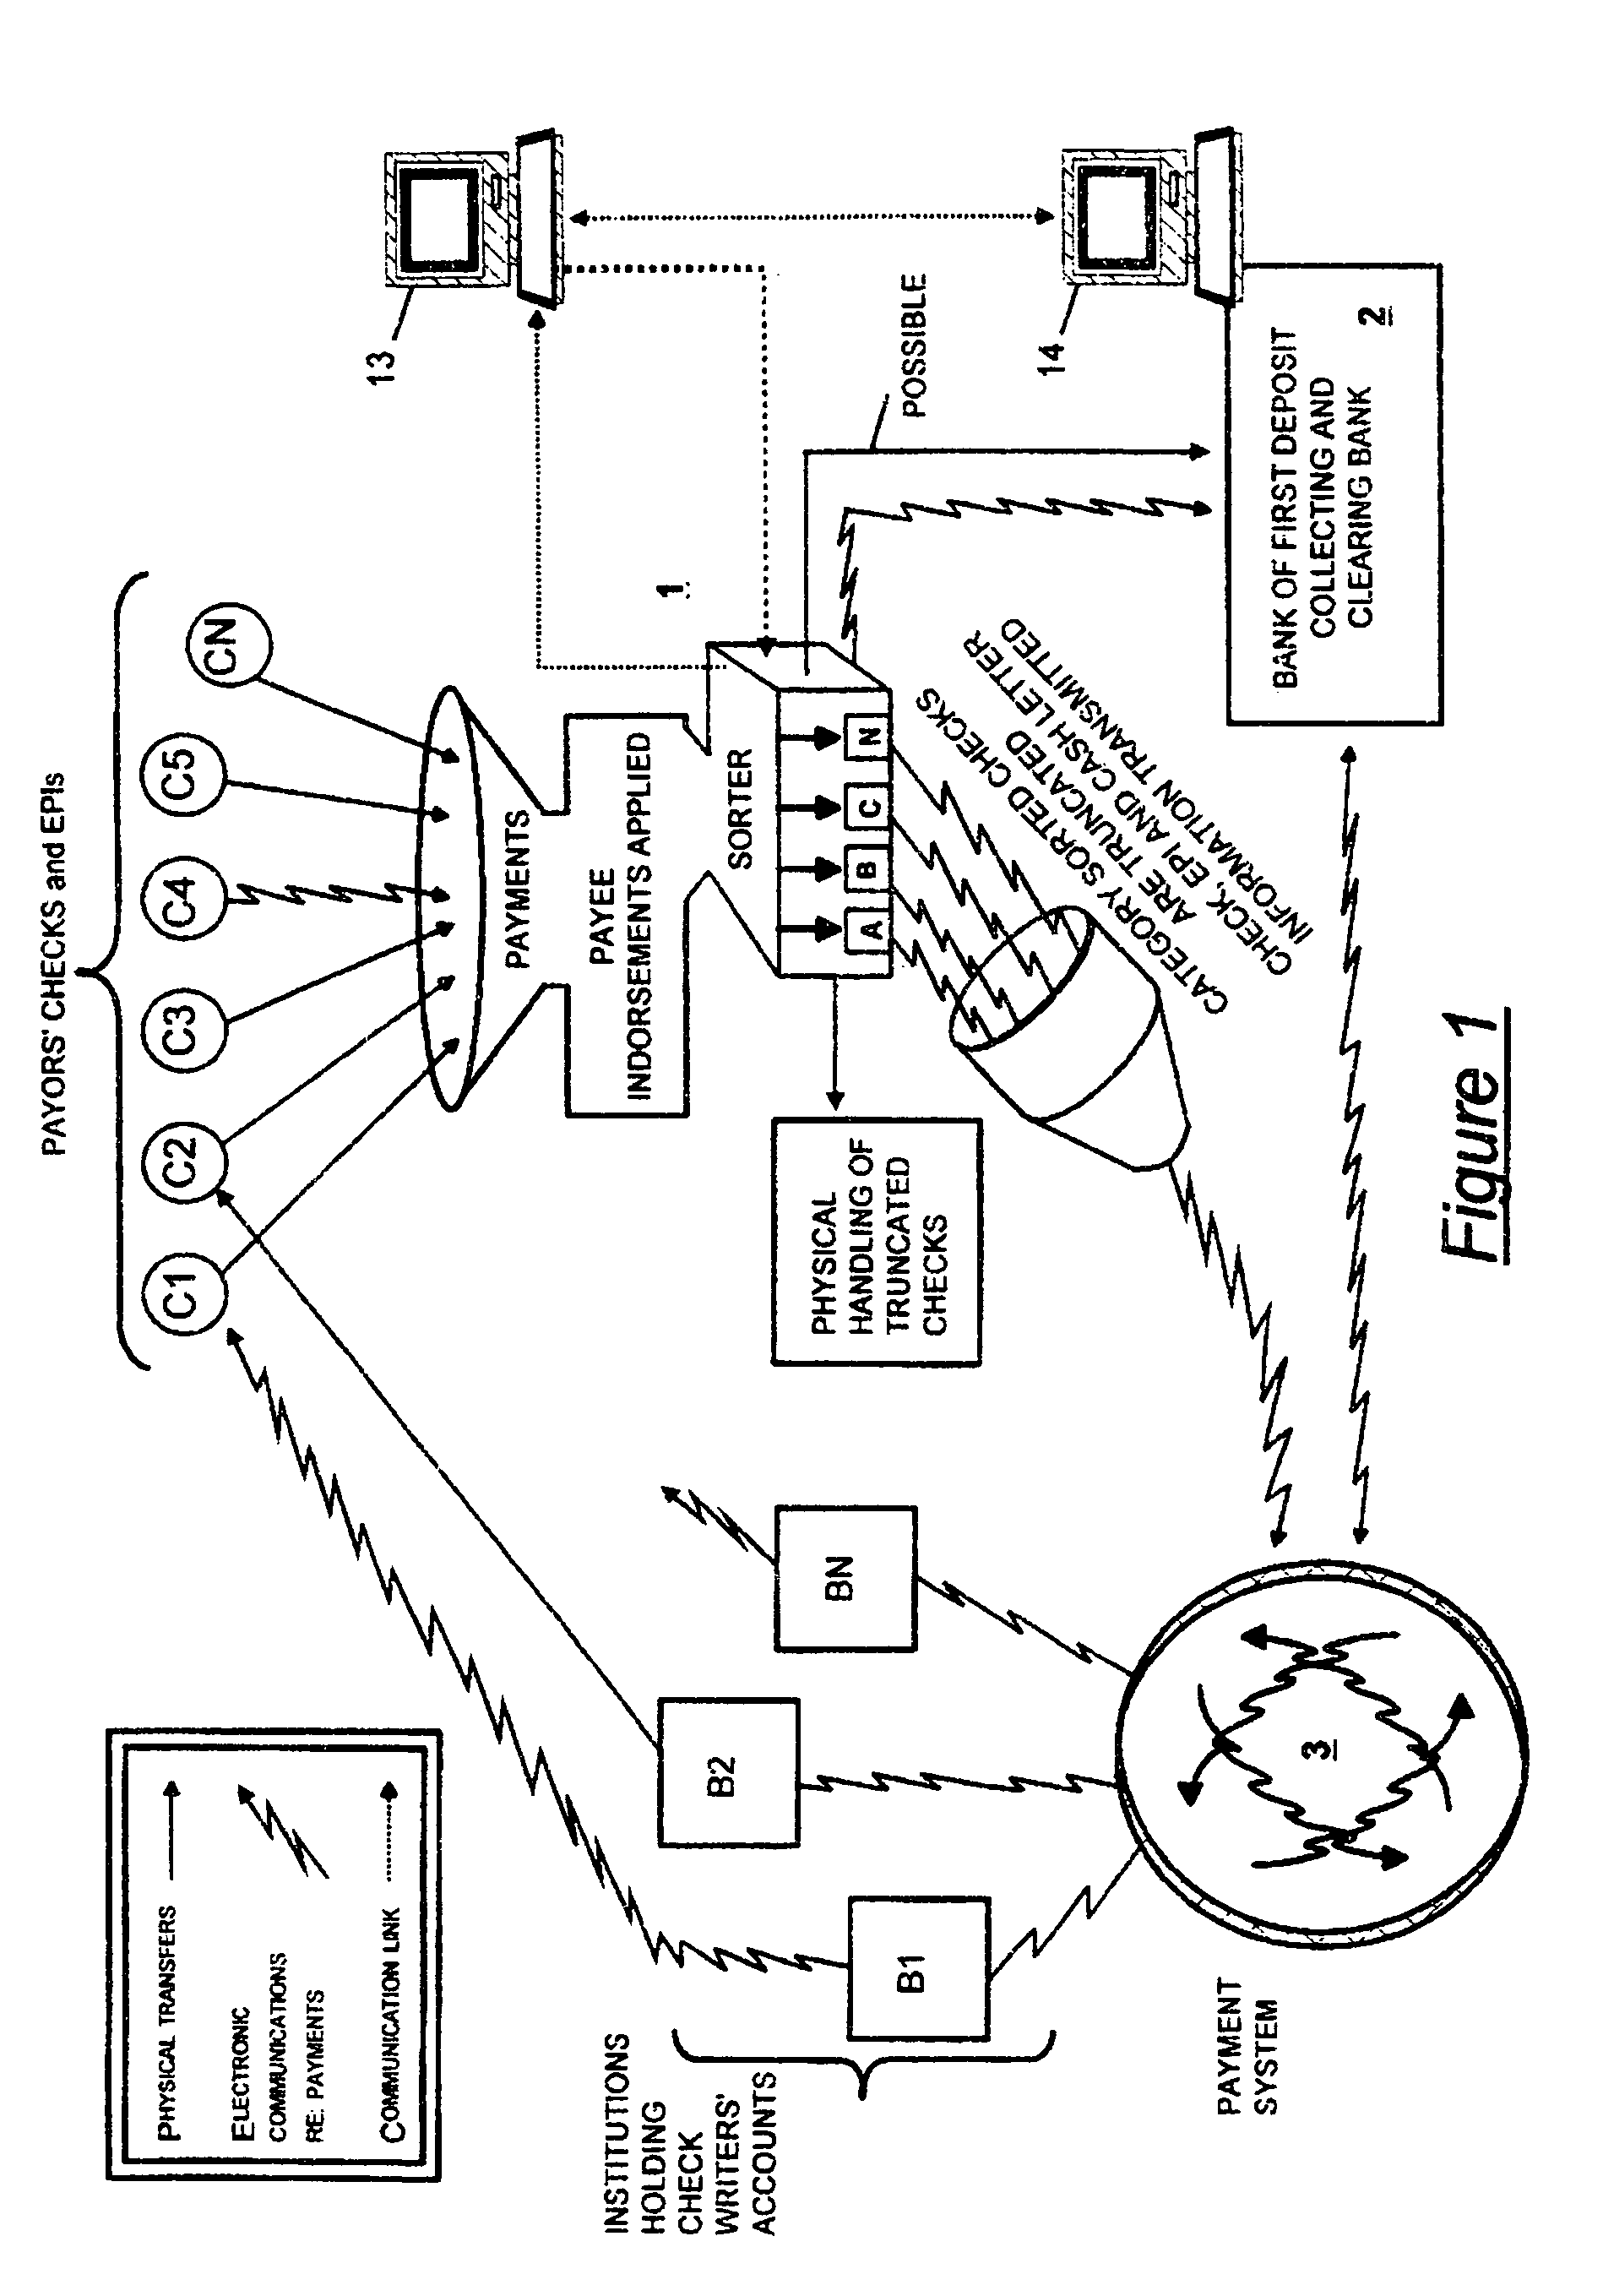 System for effecting the payment of paper and electronic financial instruments received at a payment facility